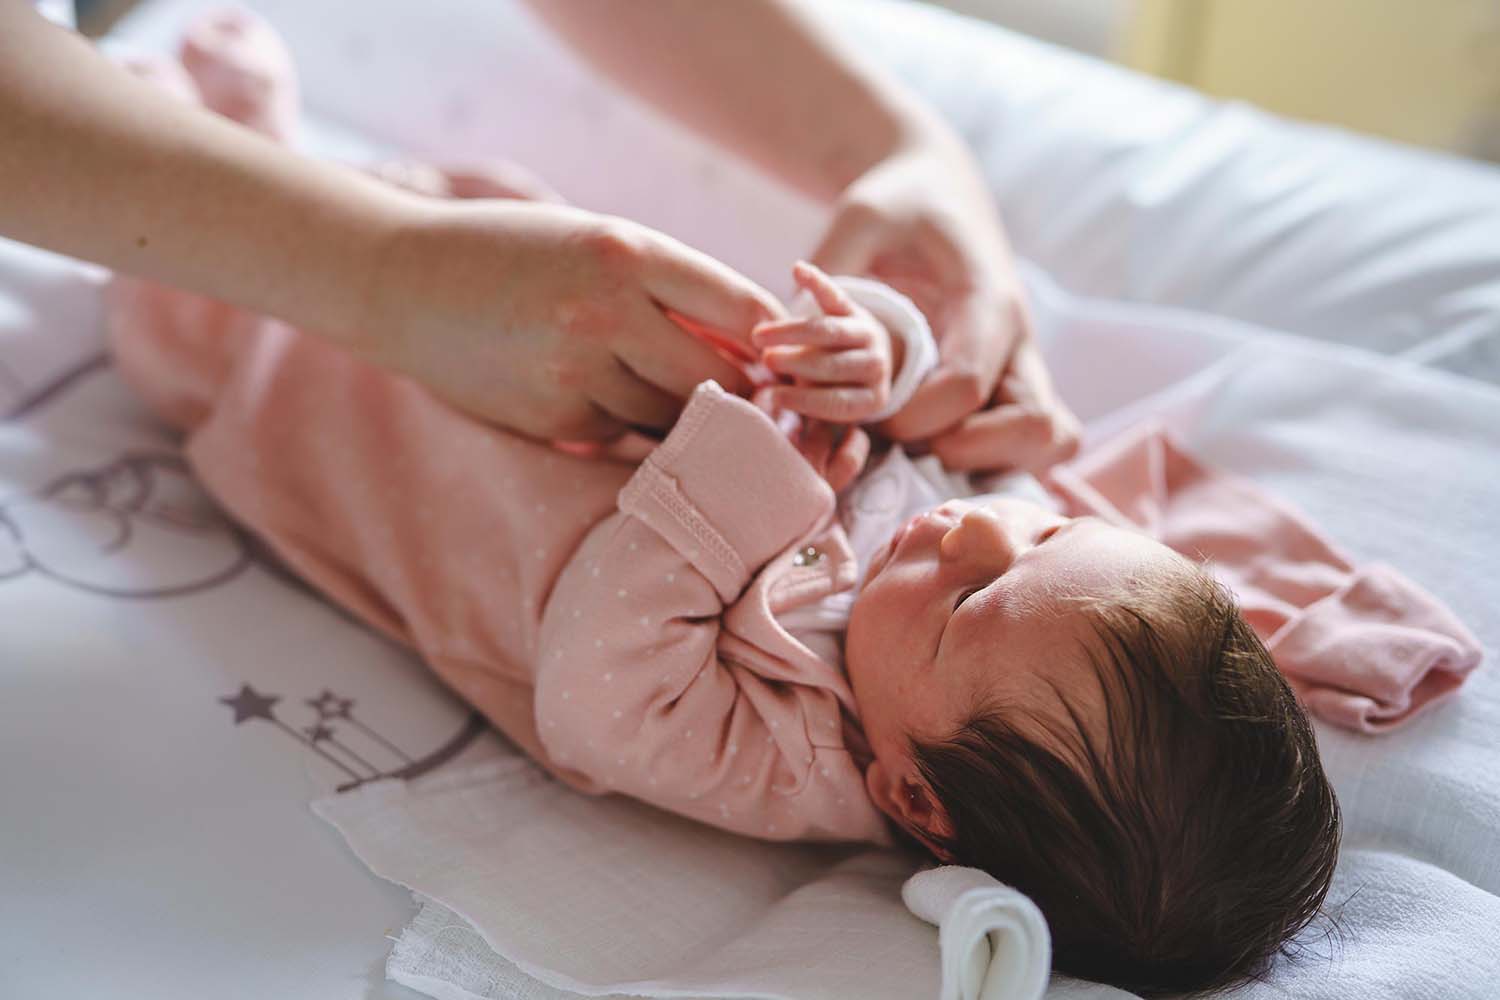 Newborn with dark hair, wearing pink footed pyjamas and laying on a change table is being dressed by an adult whose hands are buttoning the front of the clothes.